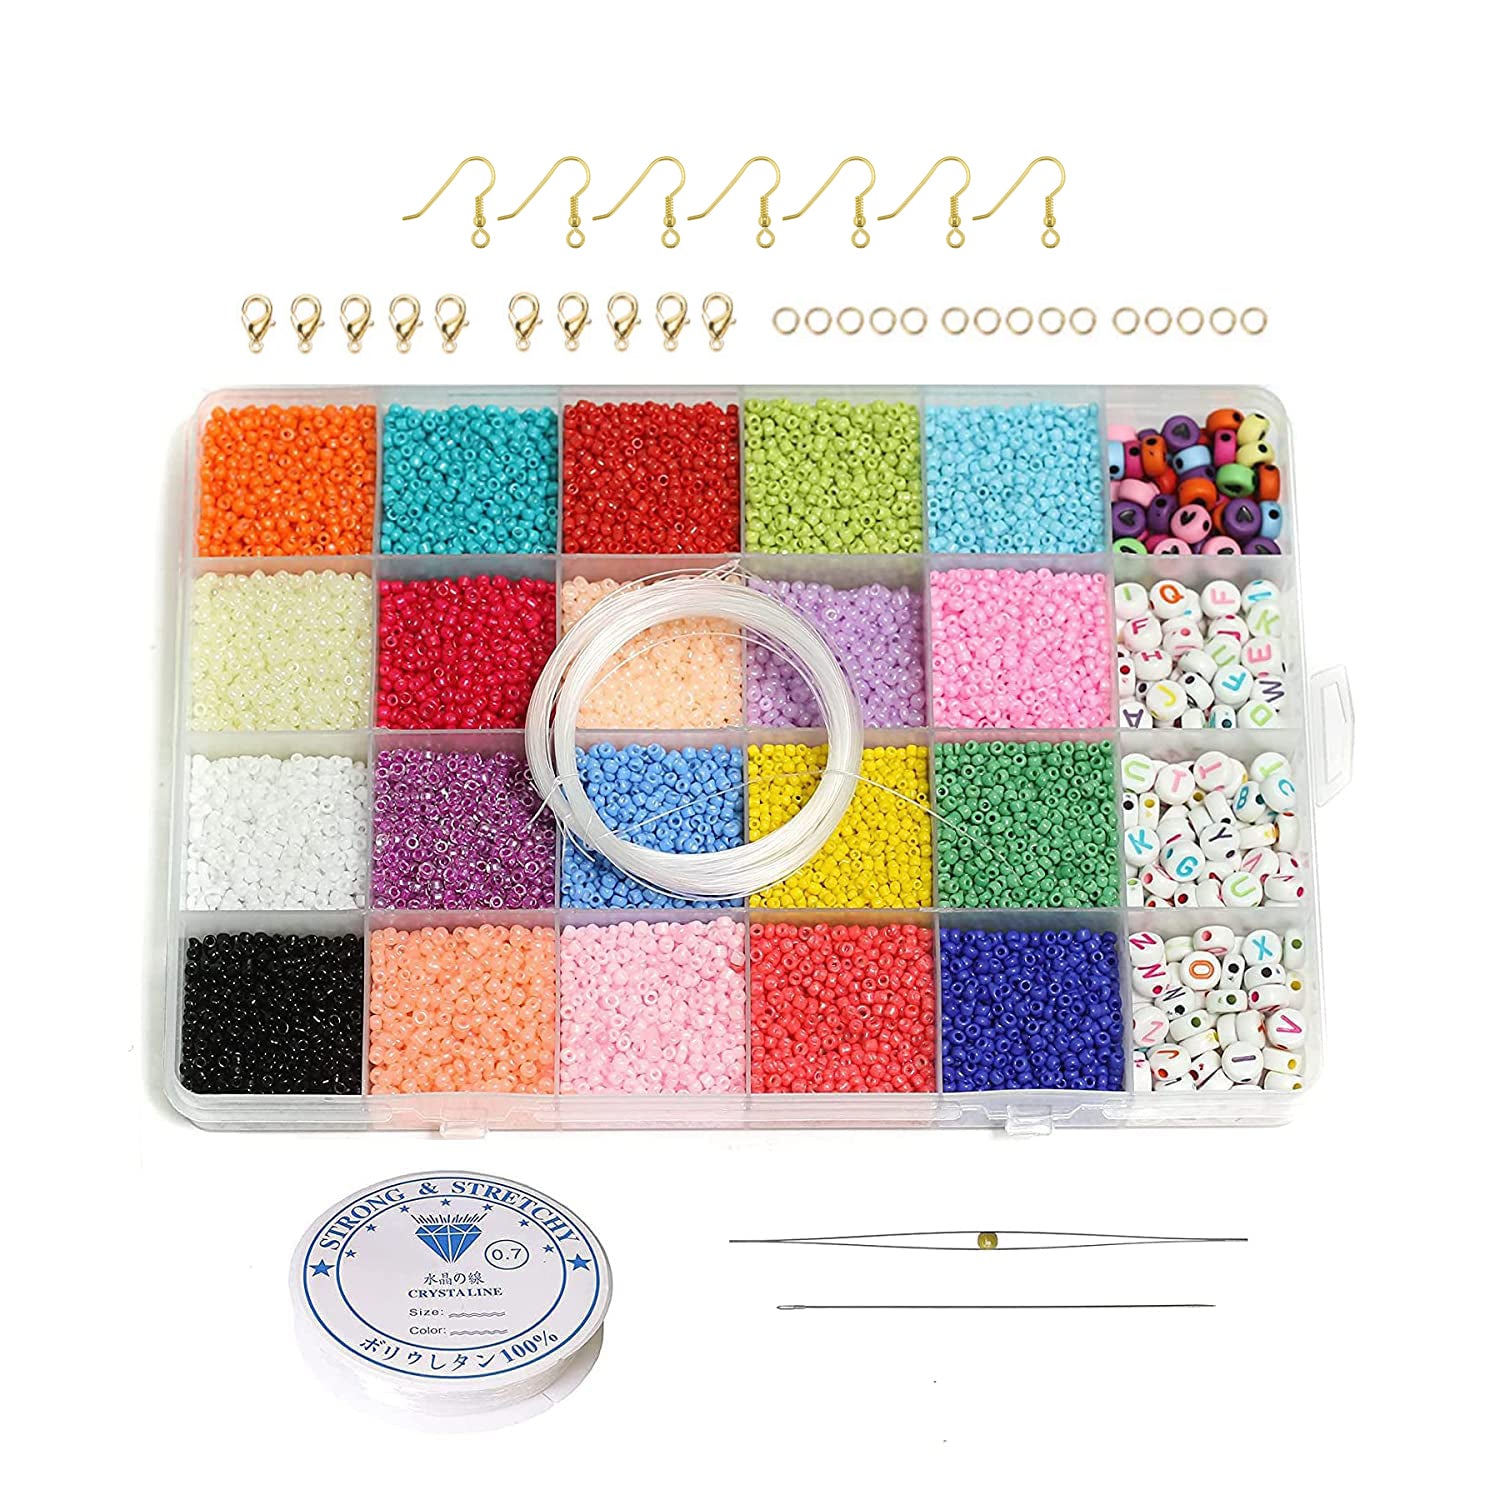 Friendship Bracelet Making Kit, Huge Value, Letter Beads, Crafts For Girls,  20 Multi-Color Embroidery Floss, A-Z Alphabet Beads, Knot Patterns,  Colorful String, Bracelet Charms, Friendship Bracelets